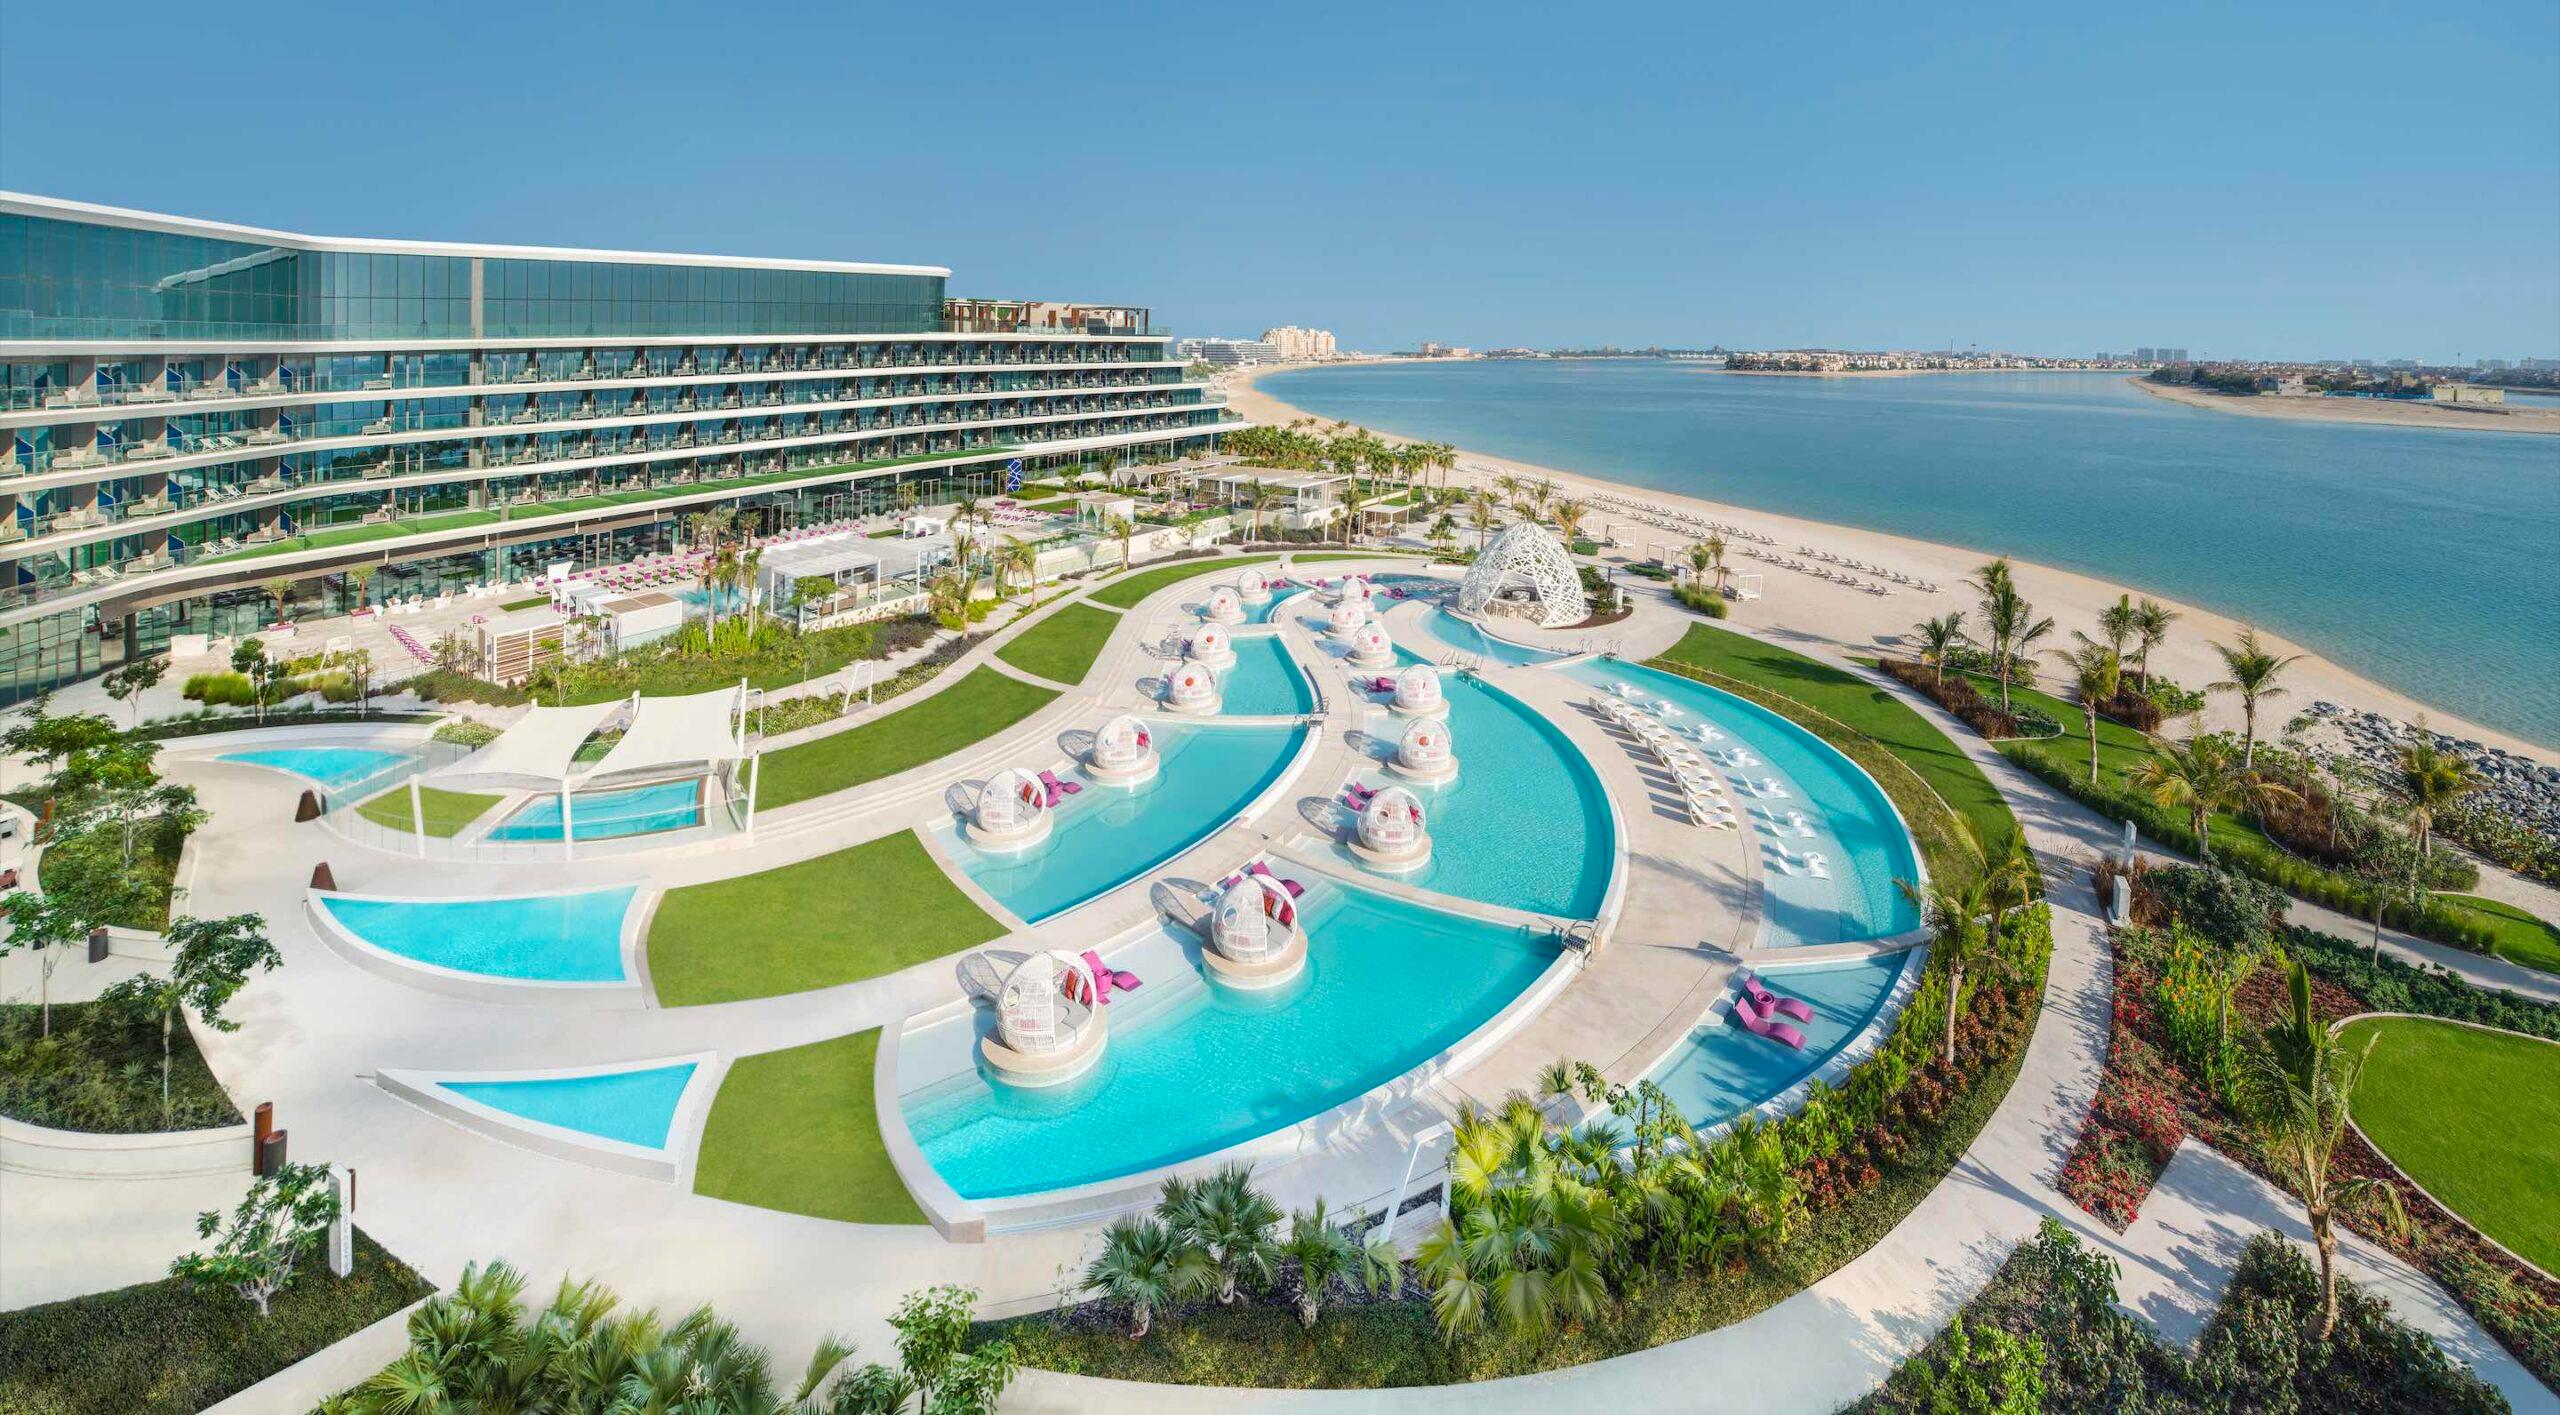 Whether you&#8217;re looking for a staycation or daycation, W Dubai &#8211; The Palm have you covered